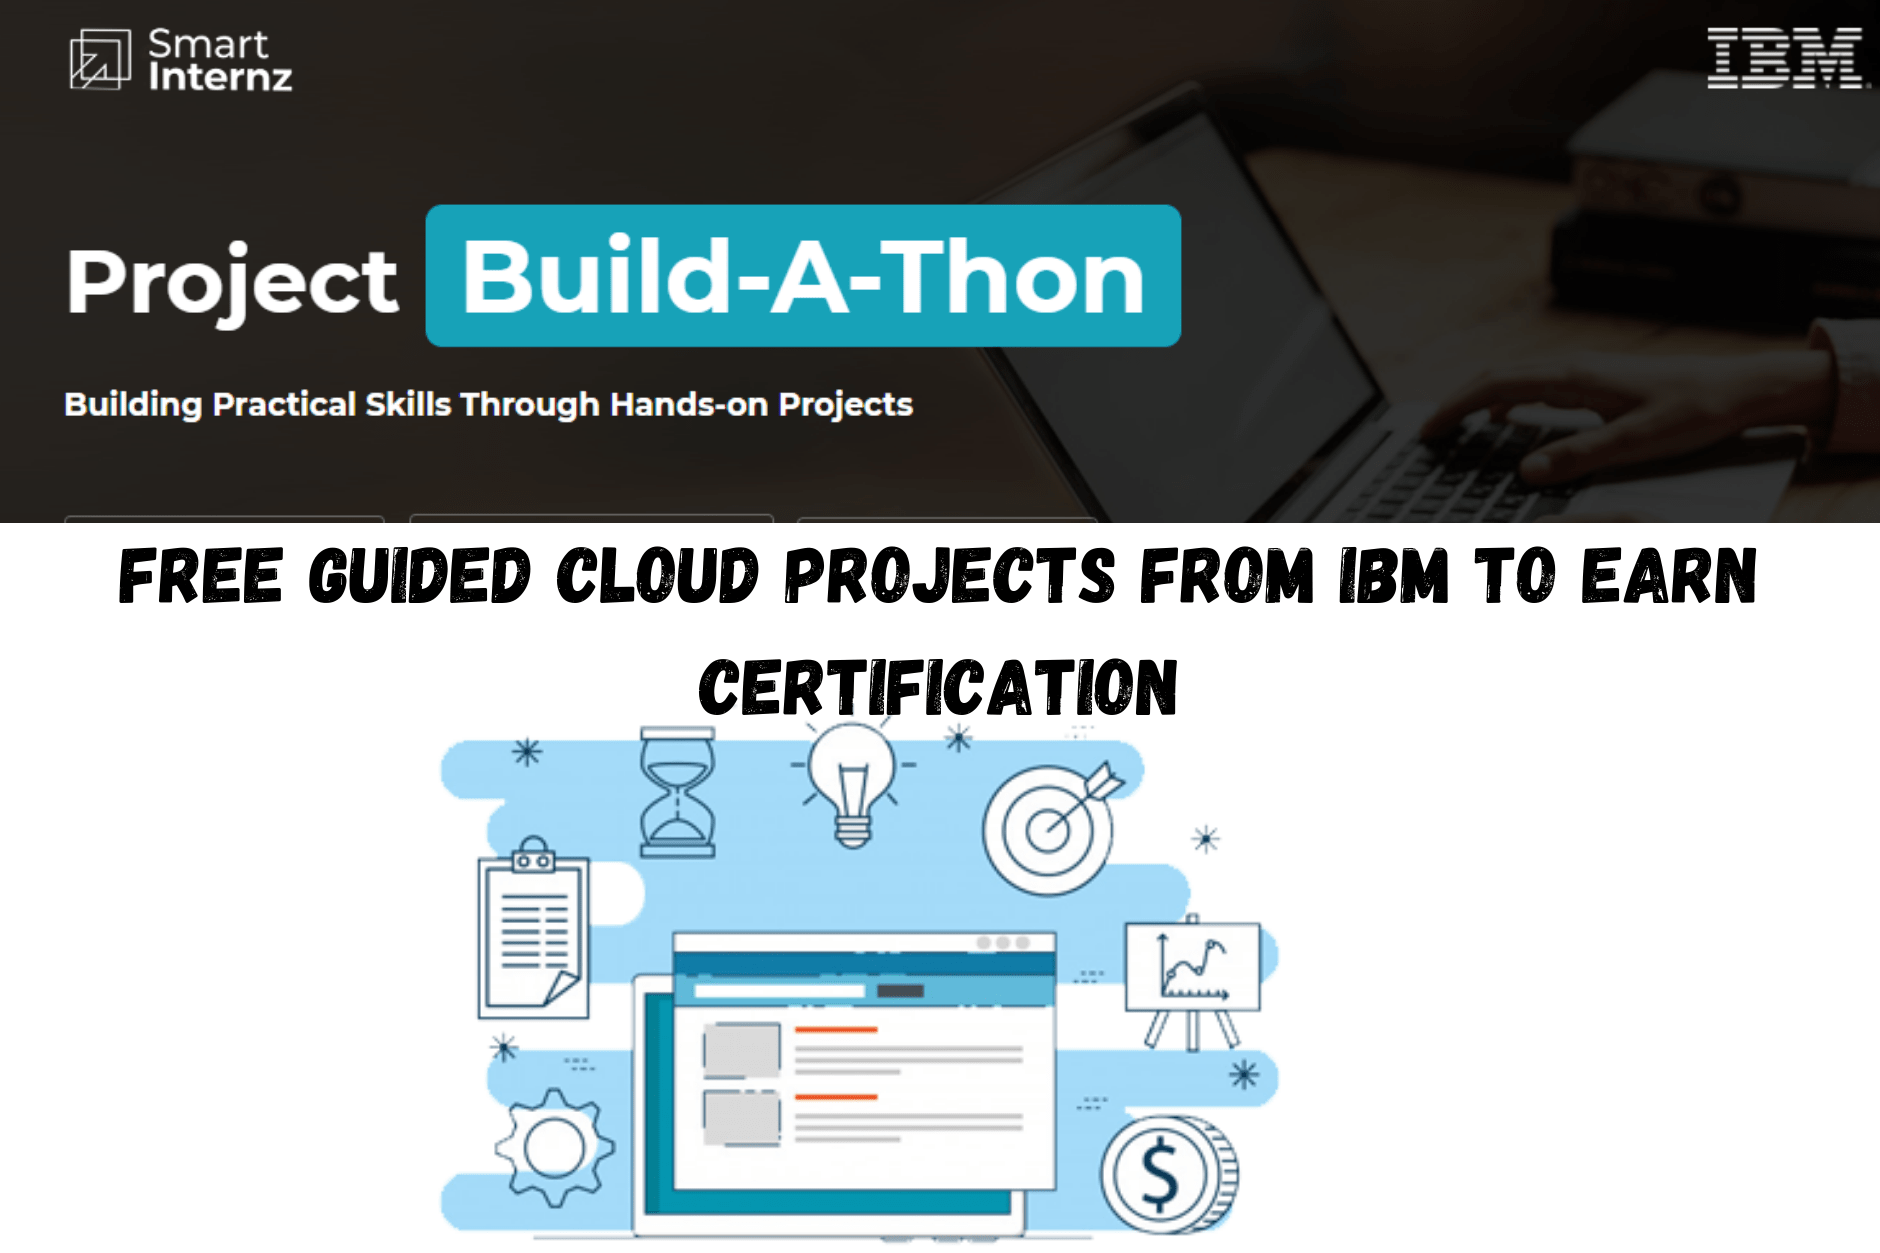 Free guided cloud projects from IBM to earn certification